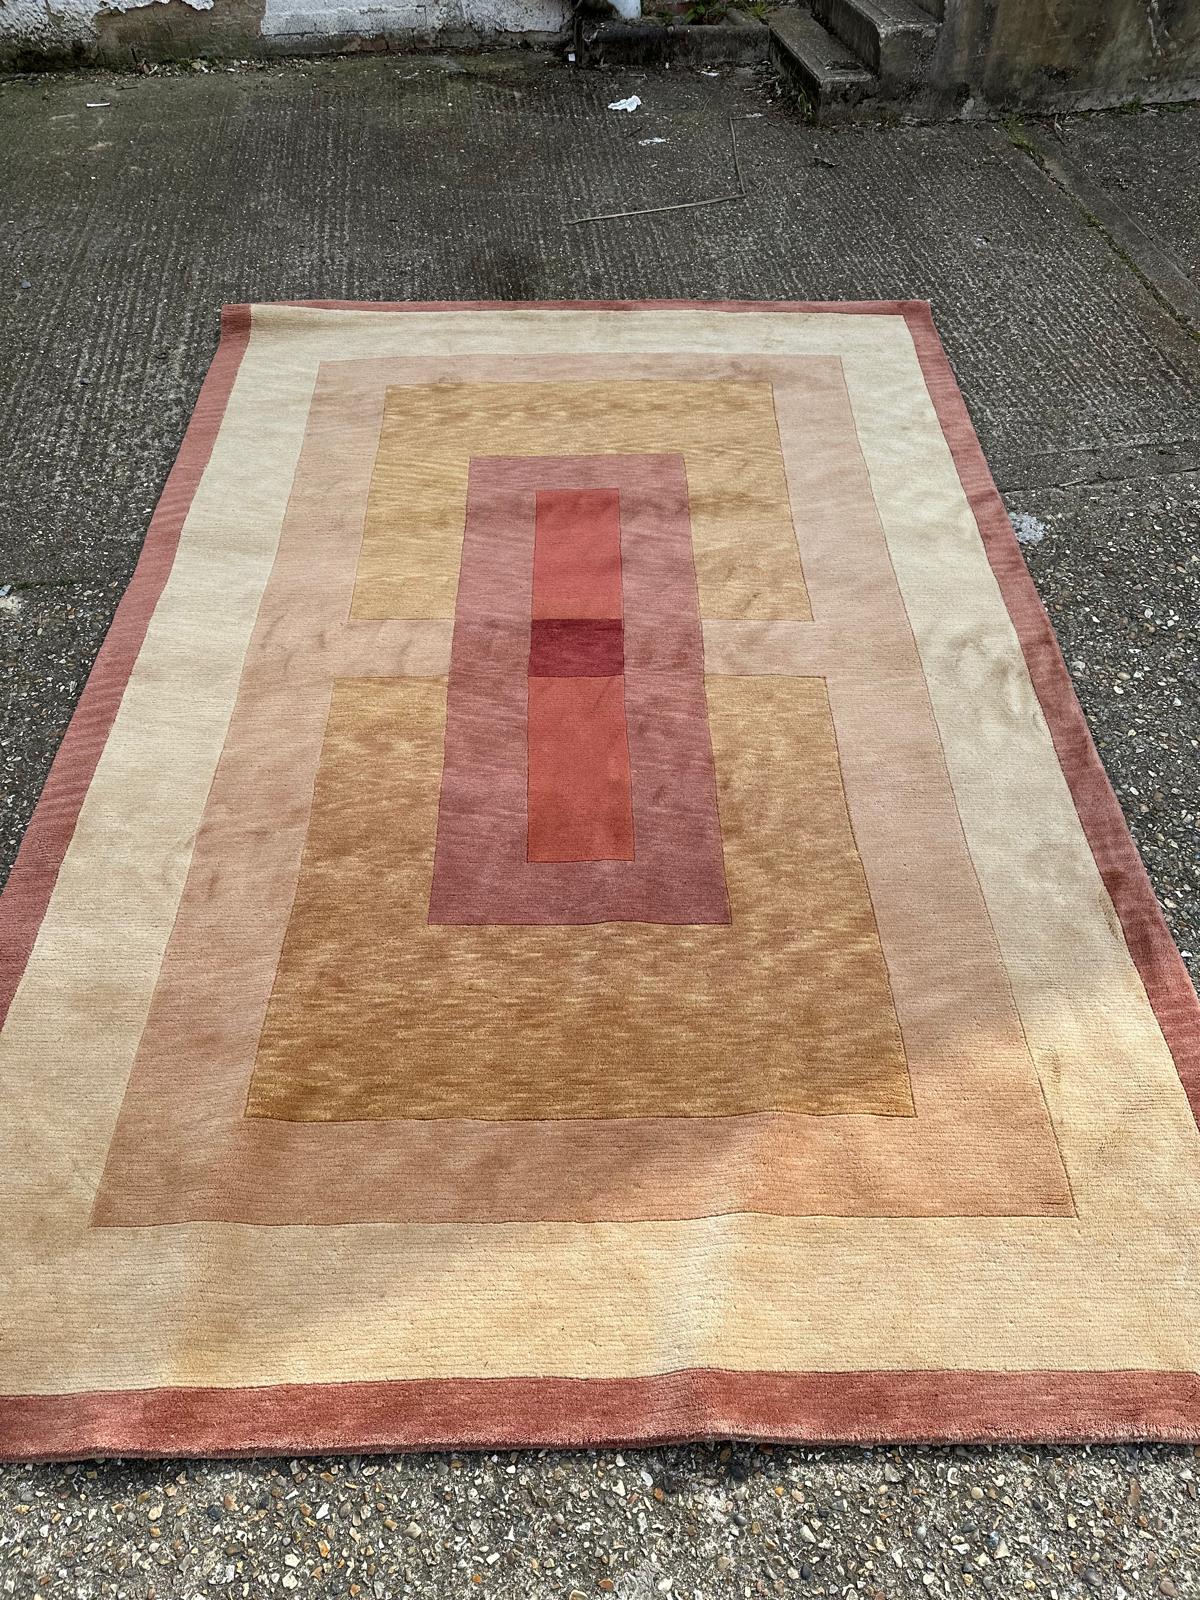 A beige ground wool rug in red, brown and orange 300cm x 210cm